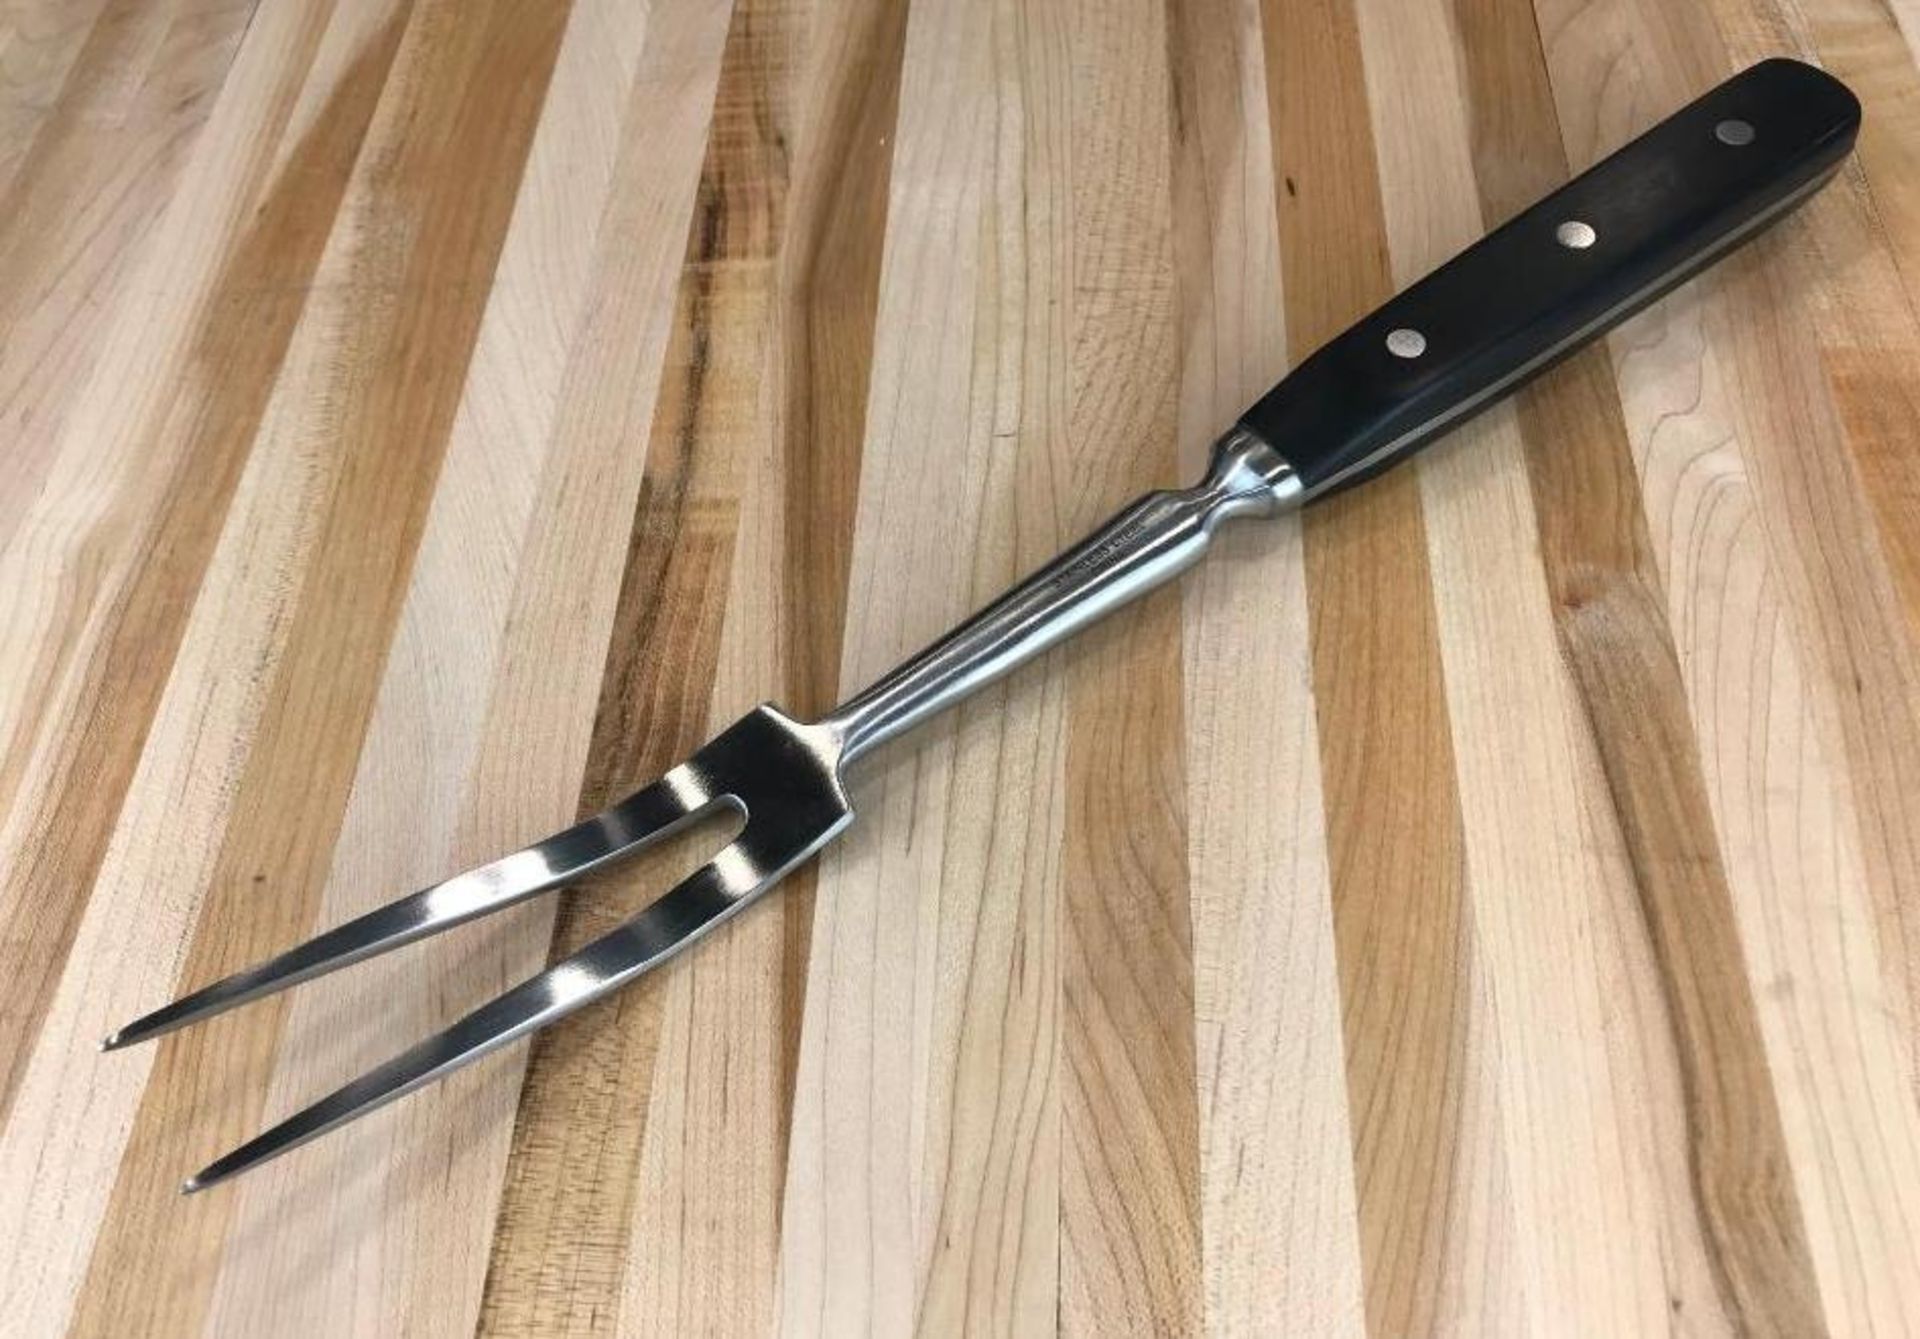 8" NELLA FORGED CHEF'S KNIFE & 13.5" STAINLESS STEEL COOK'S FORK - Image 3 of 3